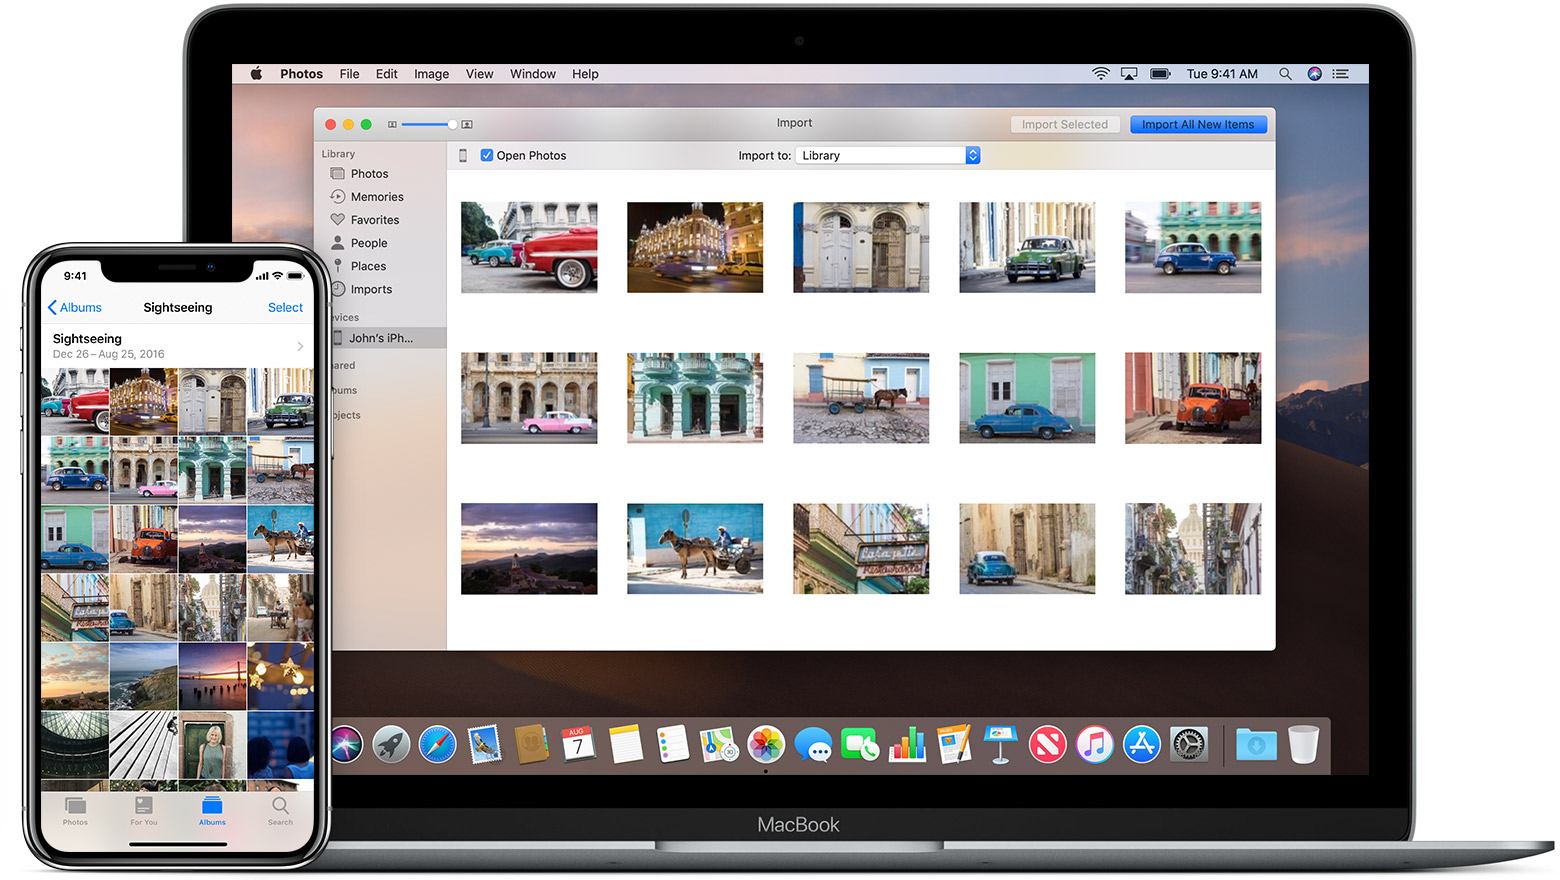 How to transfer photos from iPhone to MacBook quickly